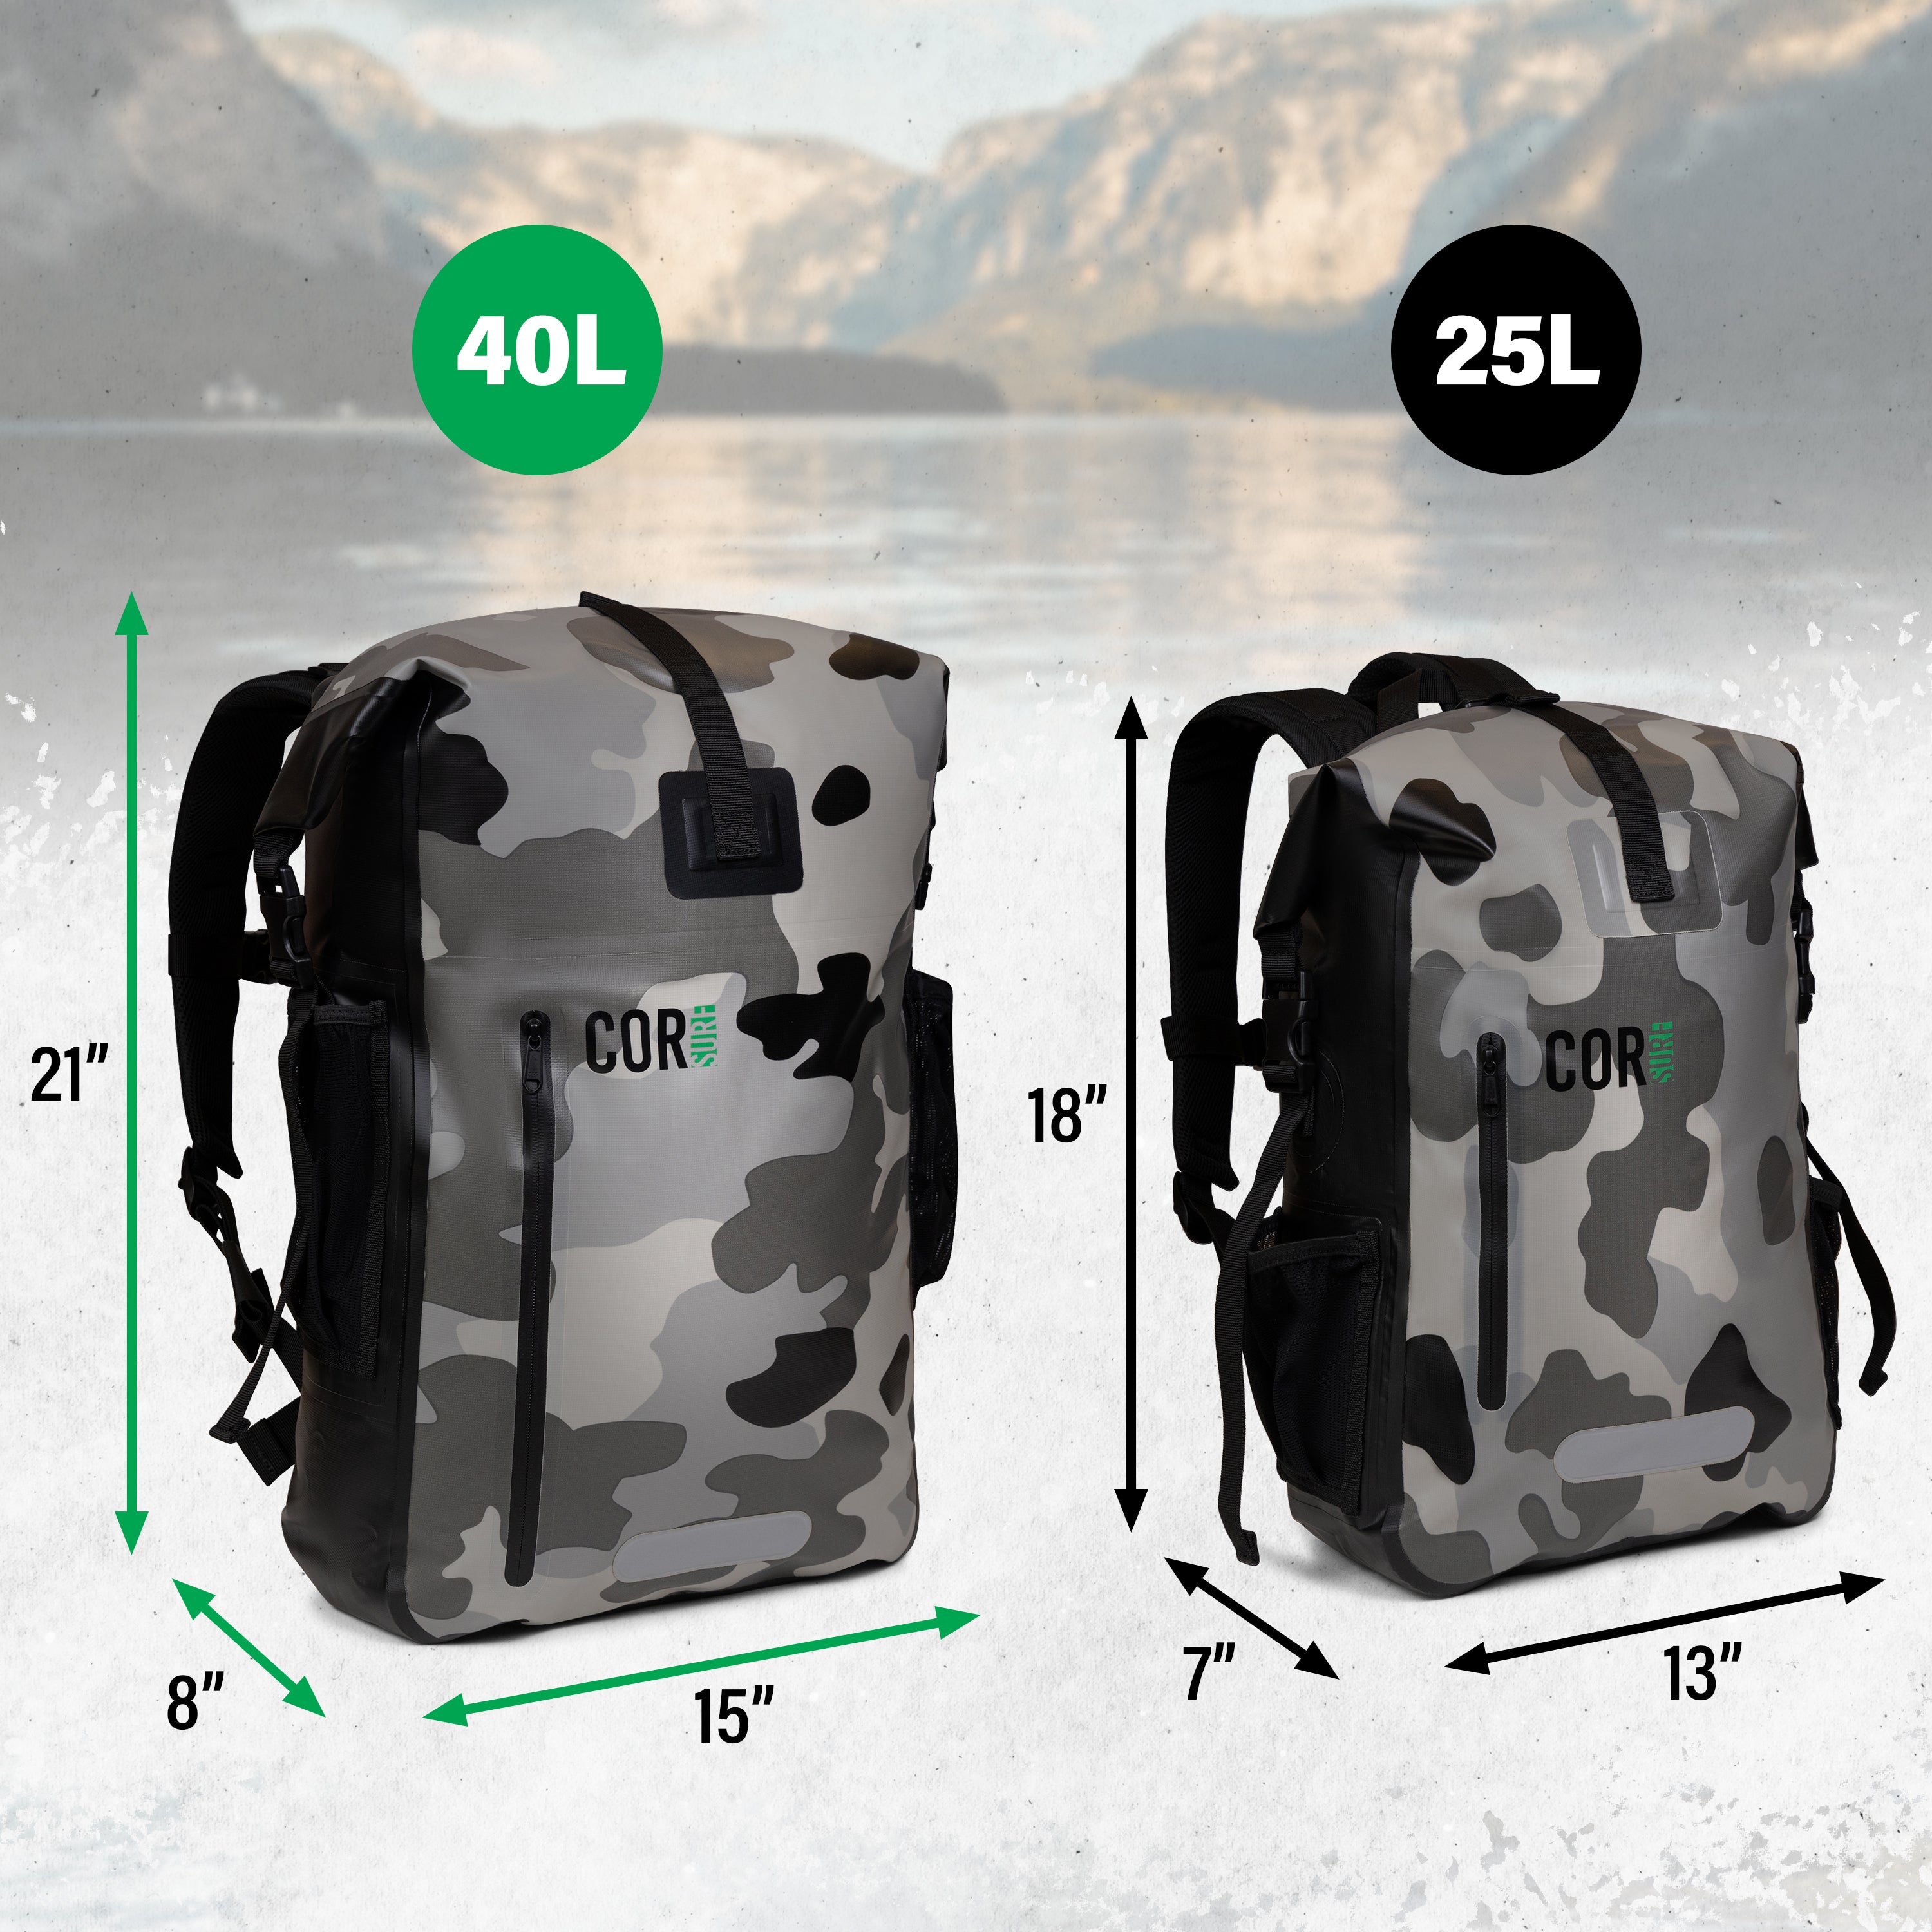 waterproof dry back backpack size chart for 25L and 40L